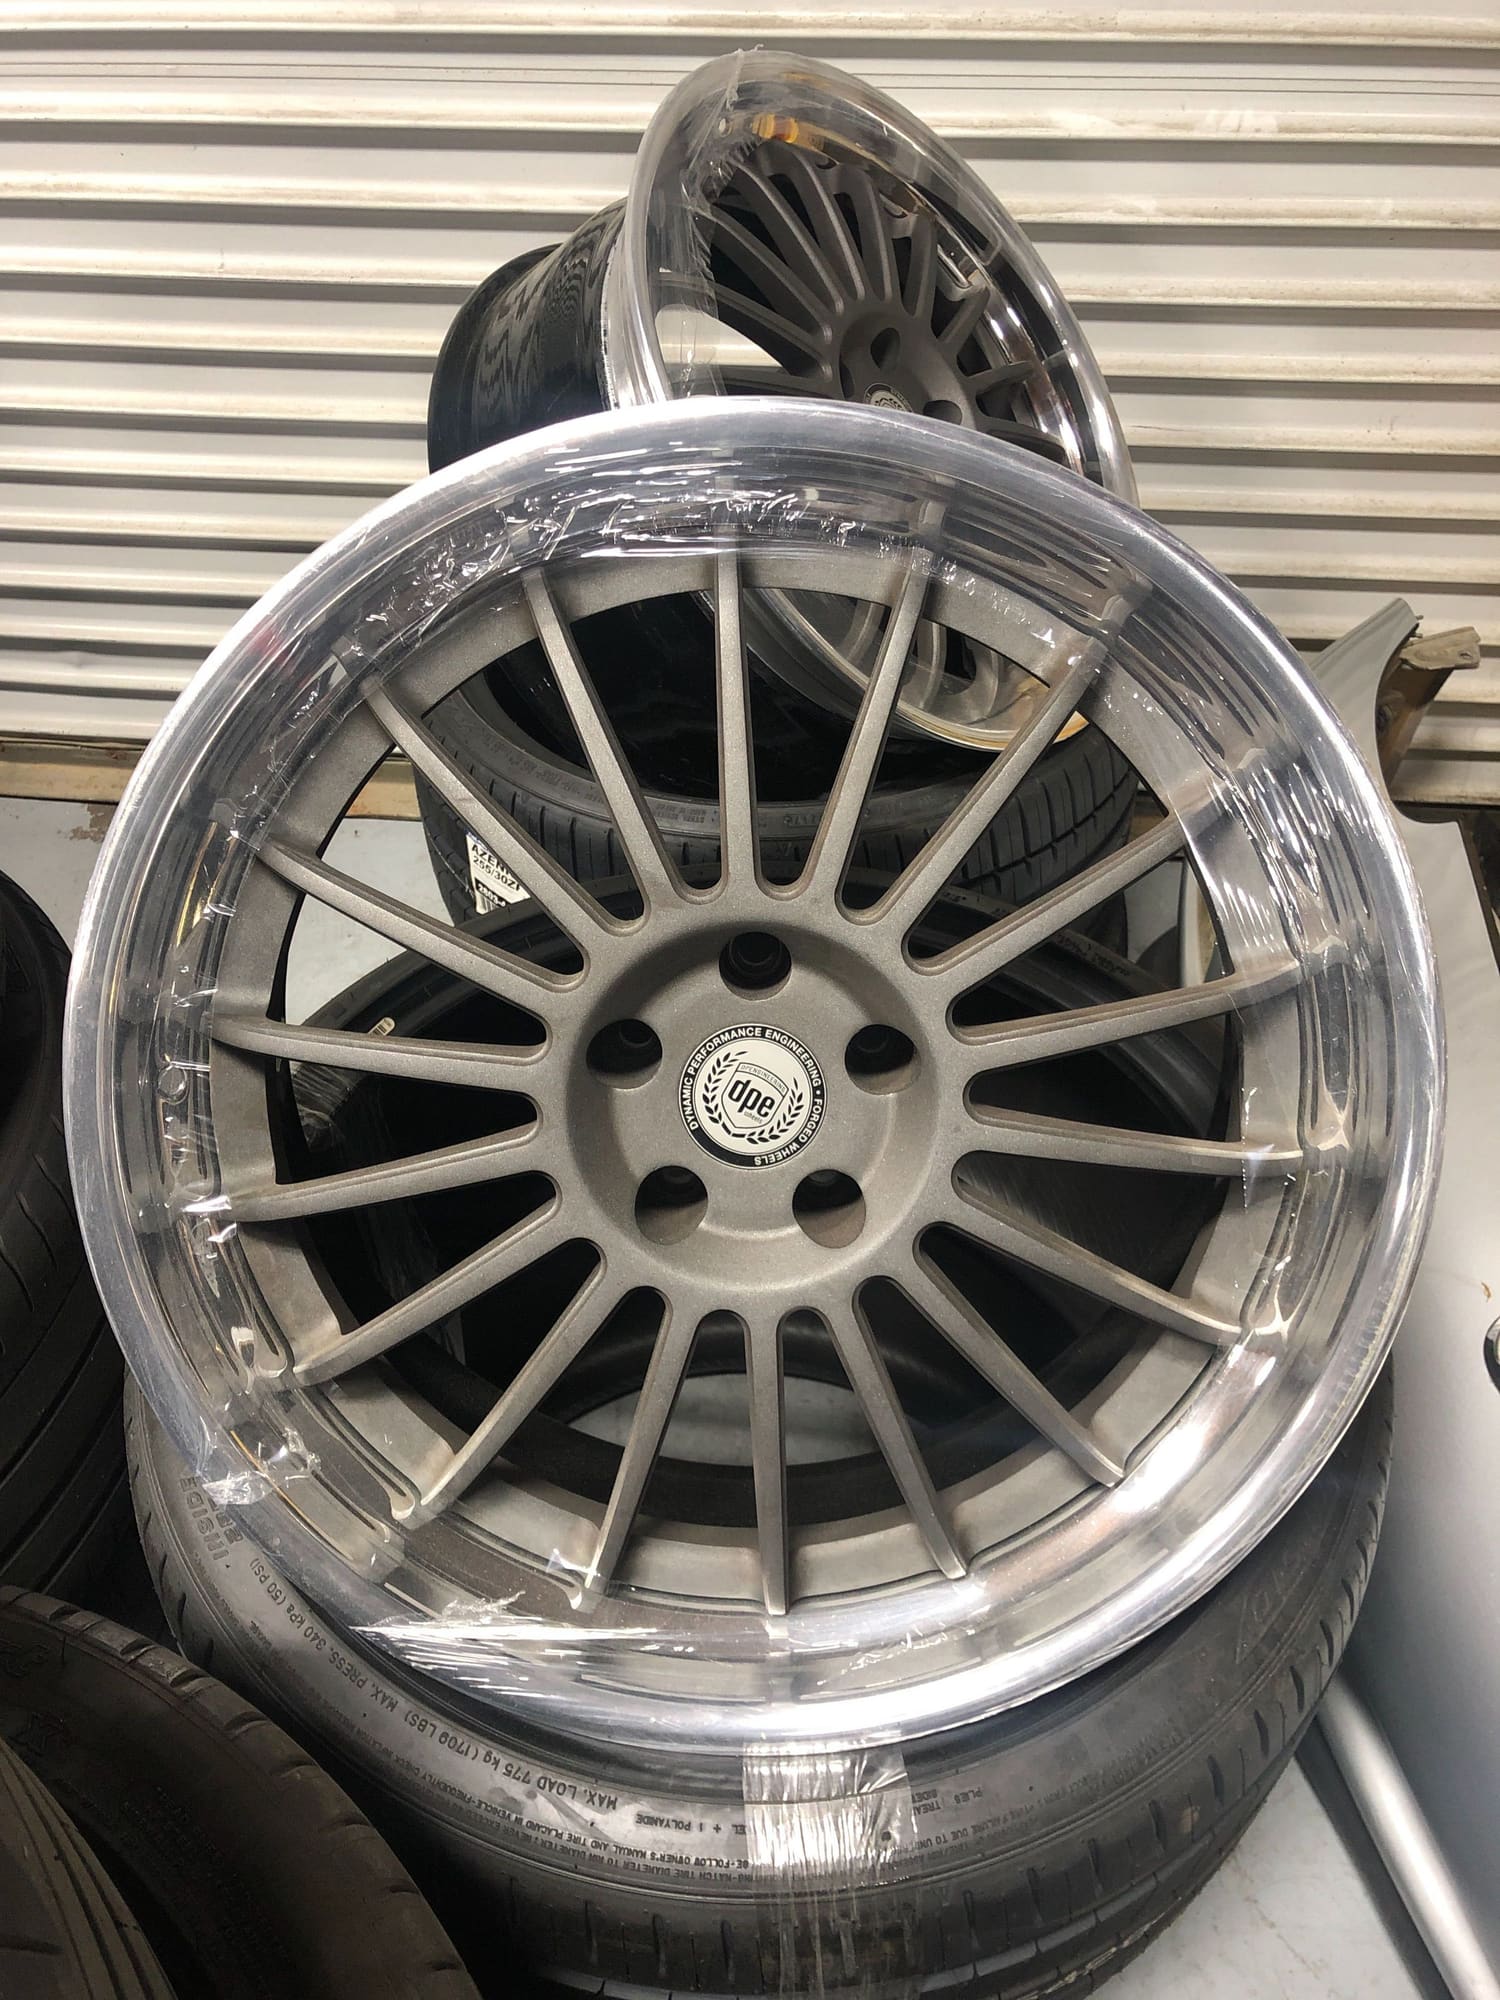 Wheels and Tires/Axles - 20" DPE Forged CS15 Wheels. CLK, CLS, E Fitment E55 E63 CLS63 CLS55 - Used - 1967 to 2019 Mercedes-Benz All Models - San Diego, CA 92121, United States